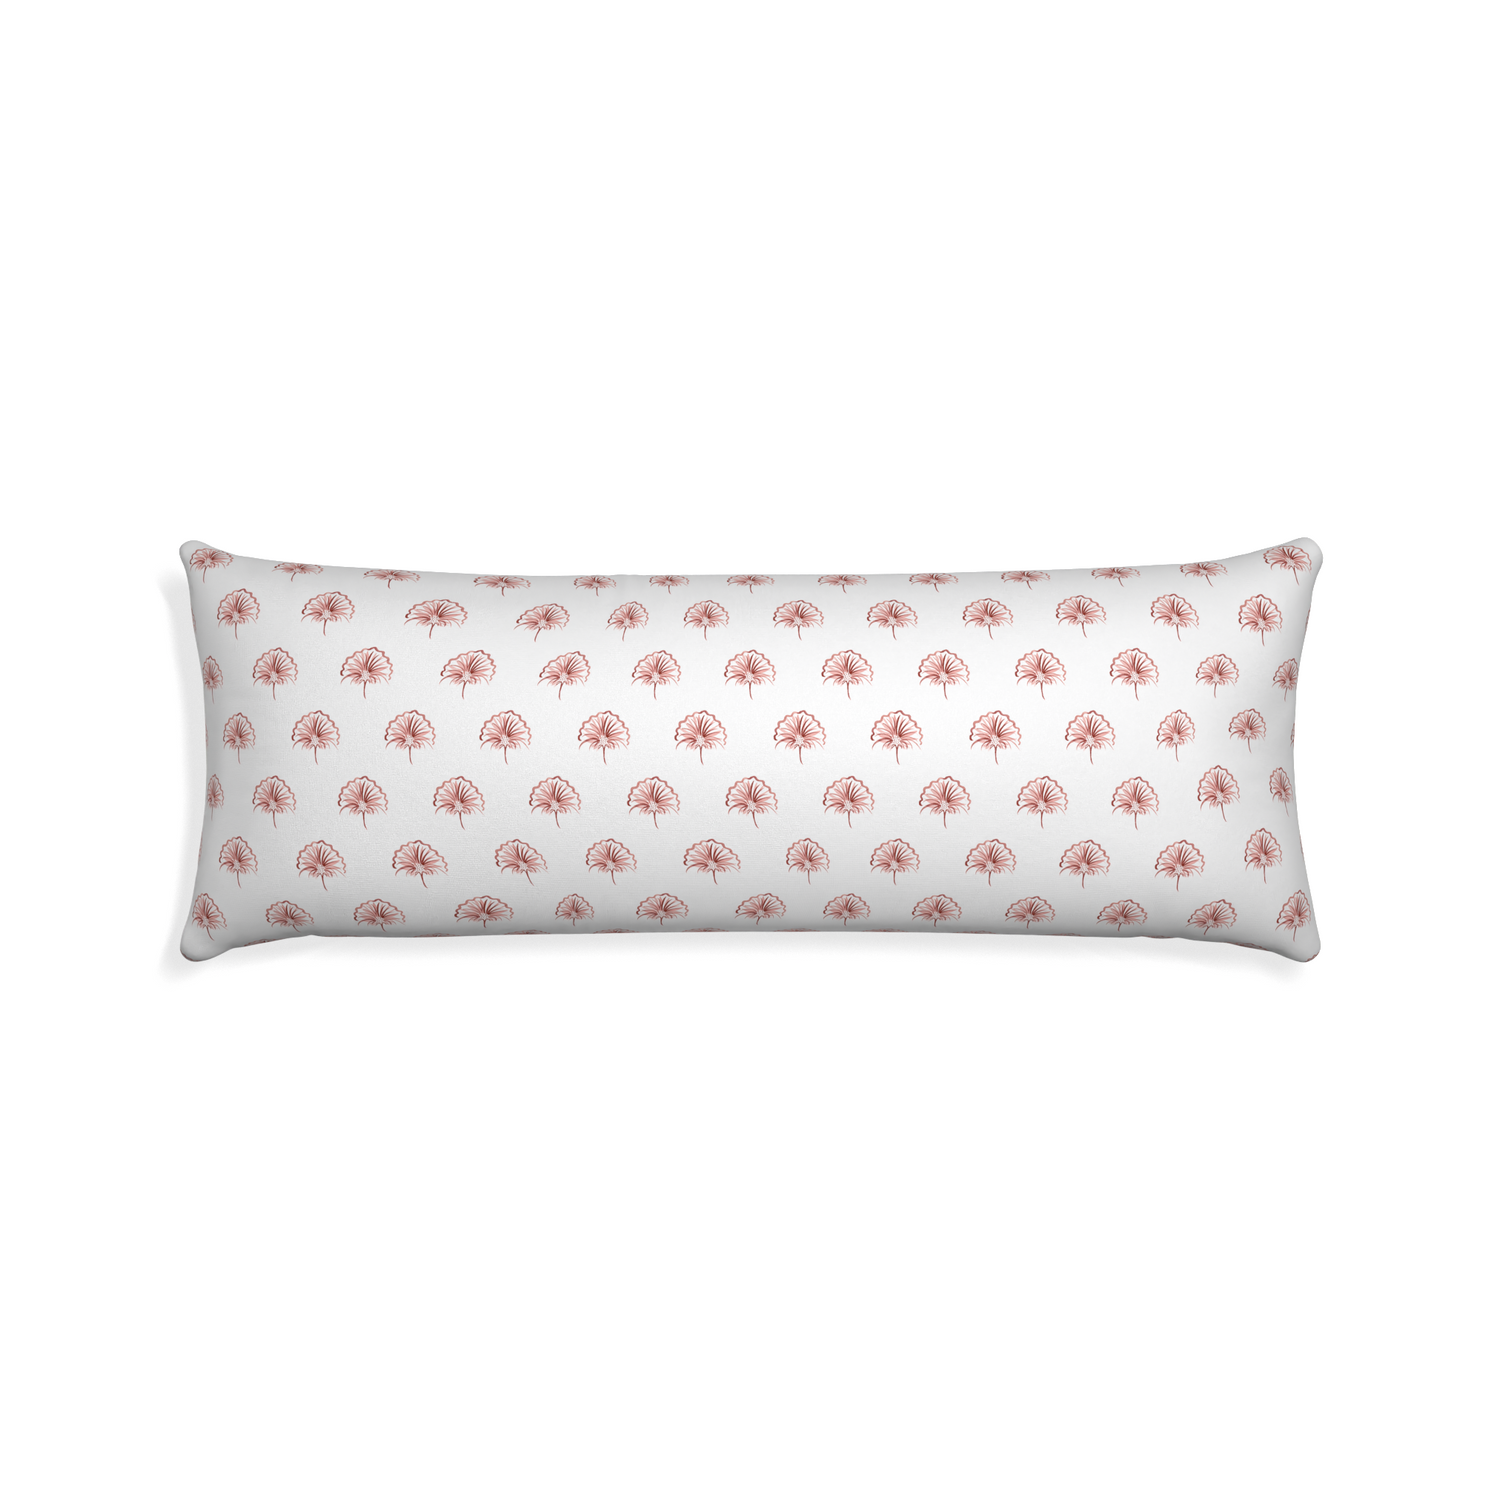 Xl-lumbar penelope rose custom floral pinkpillow with none on white background